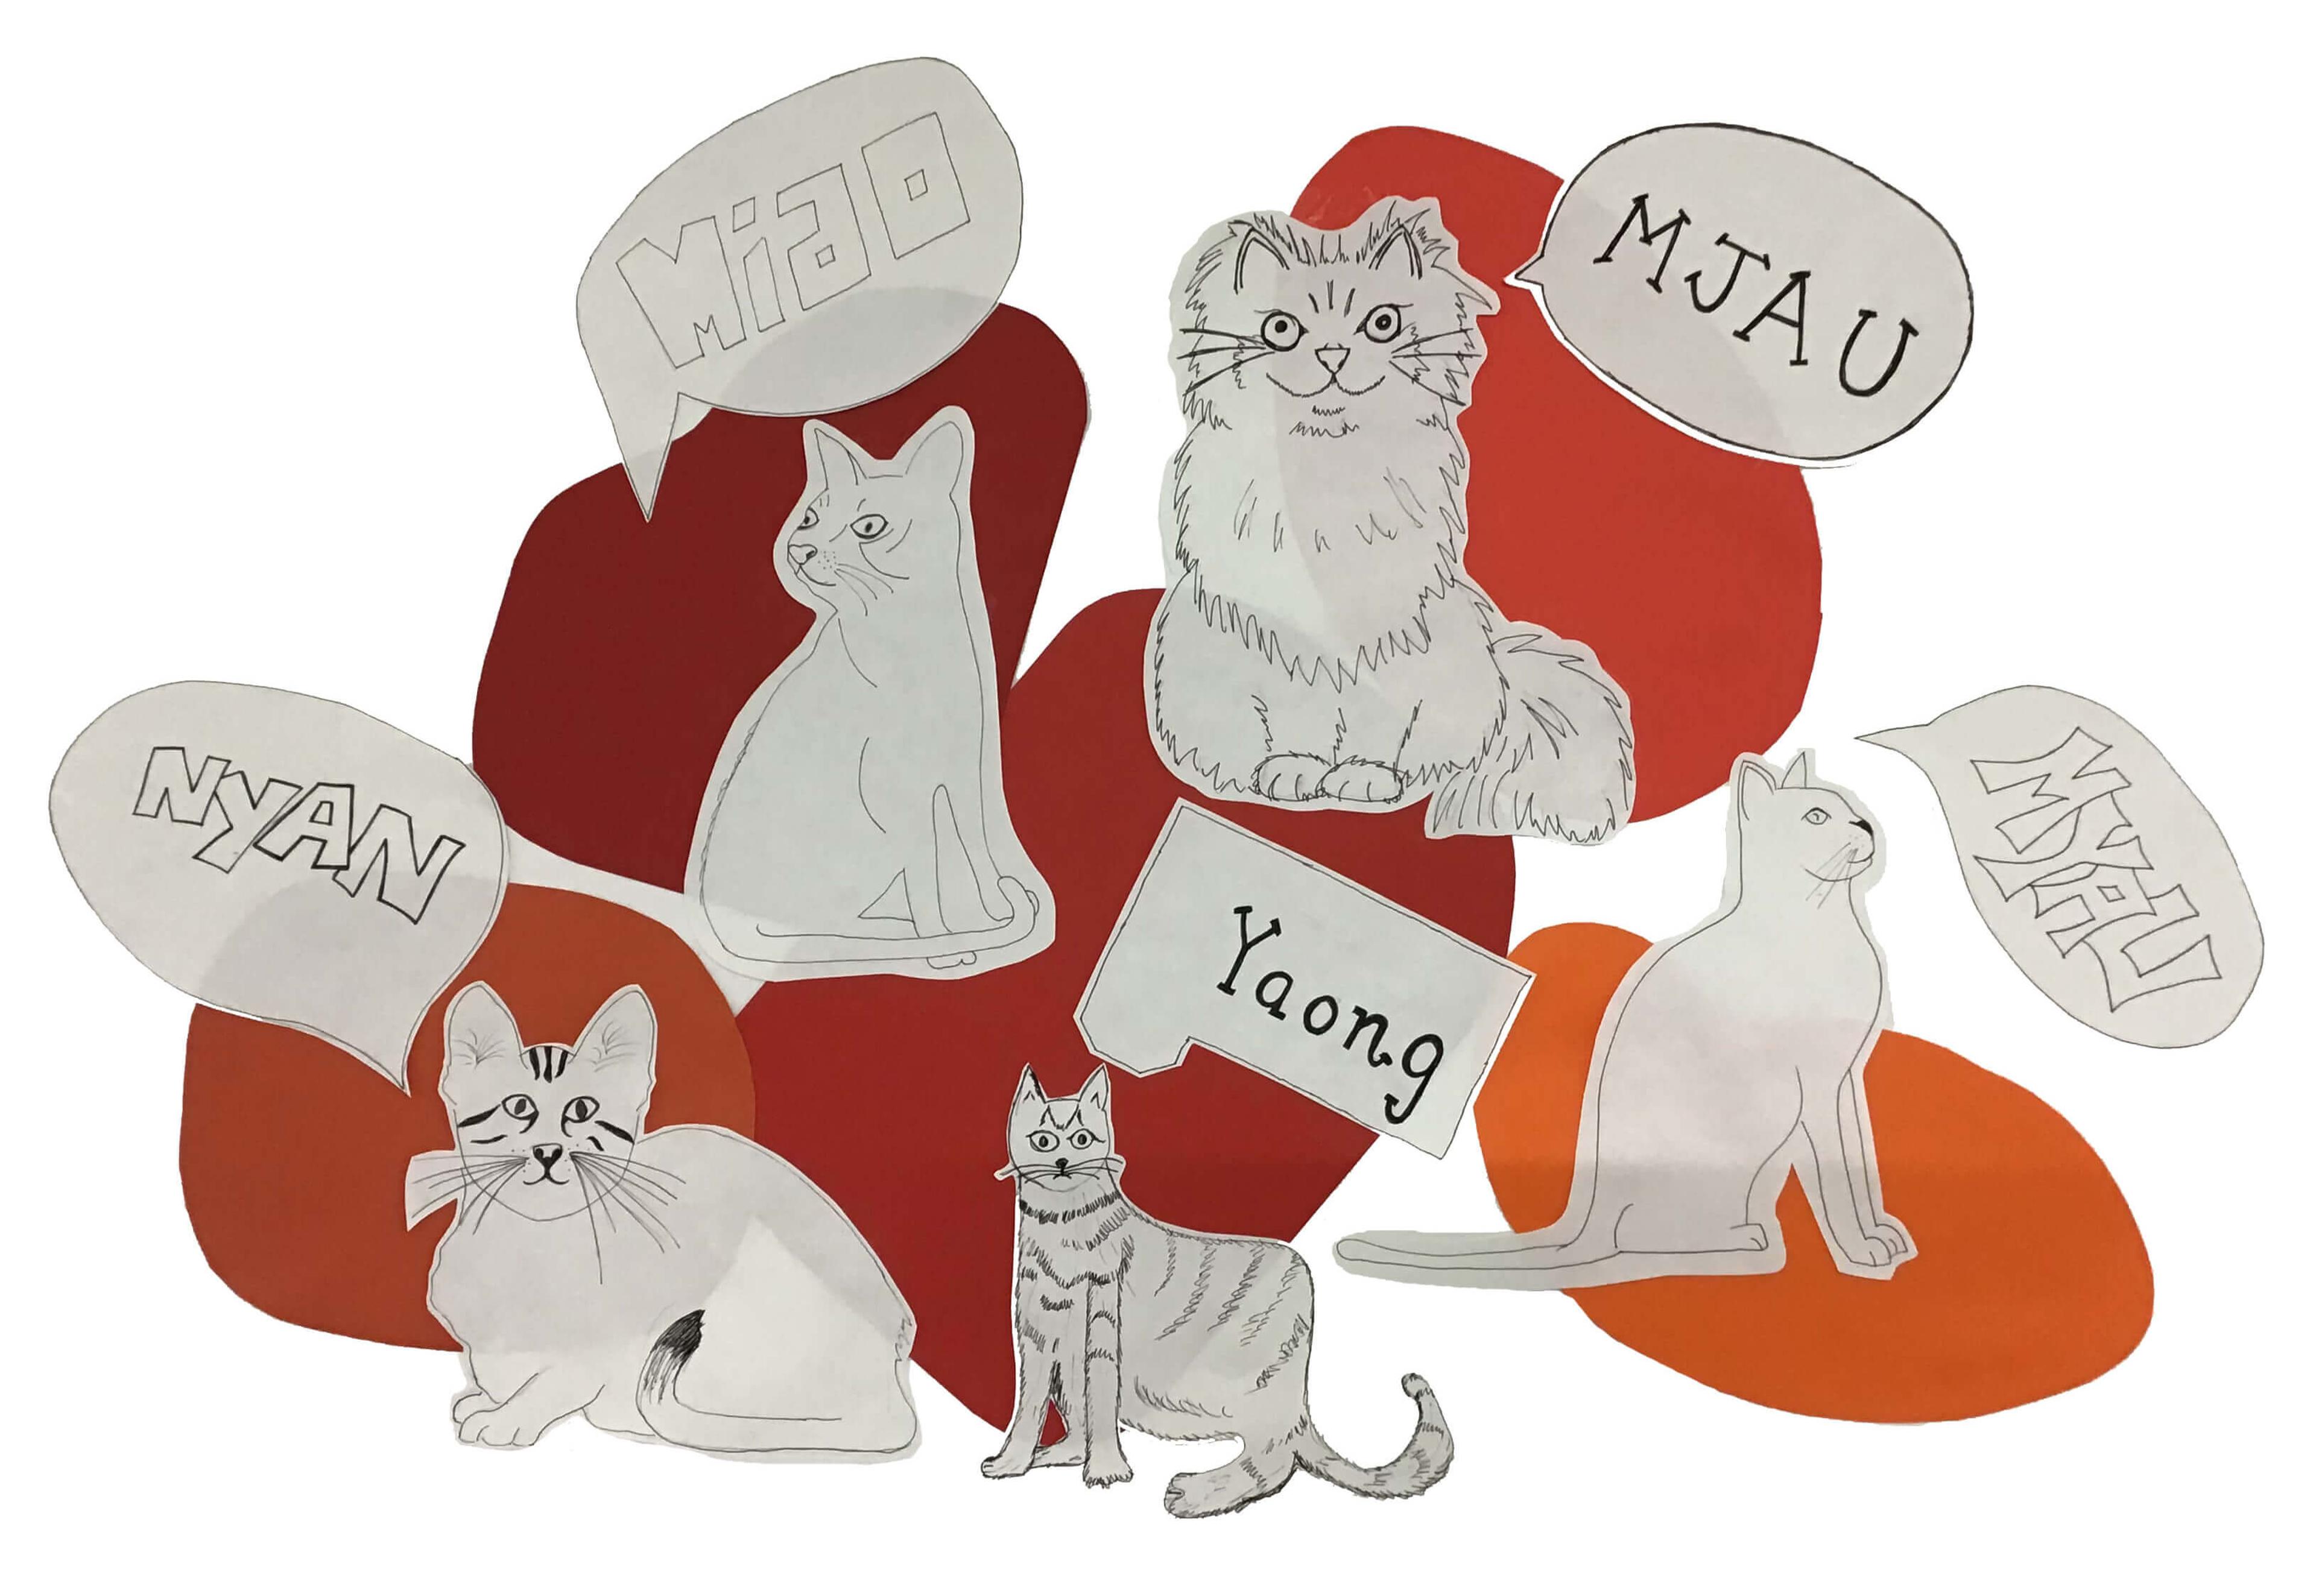 A collage featuring drawings of cats with speech bubbles with the sounds made by the animal in different languages